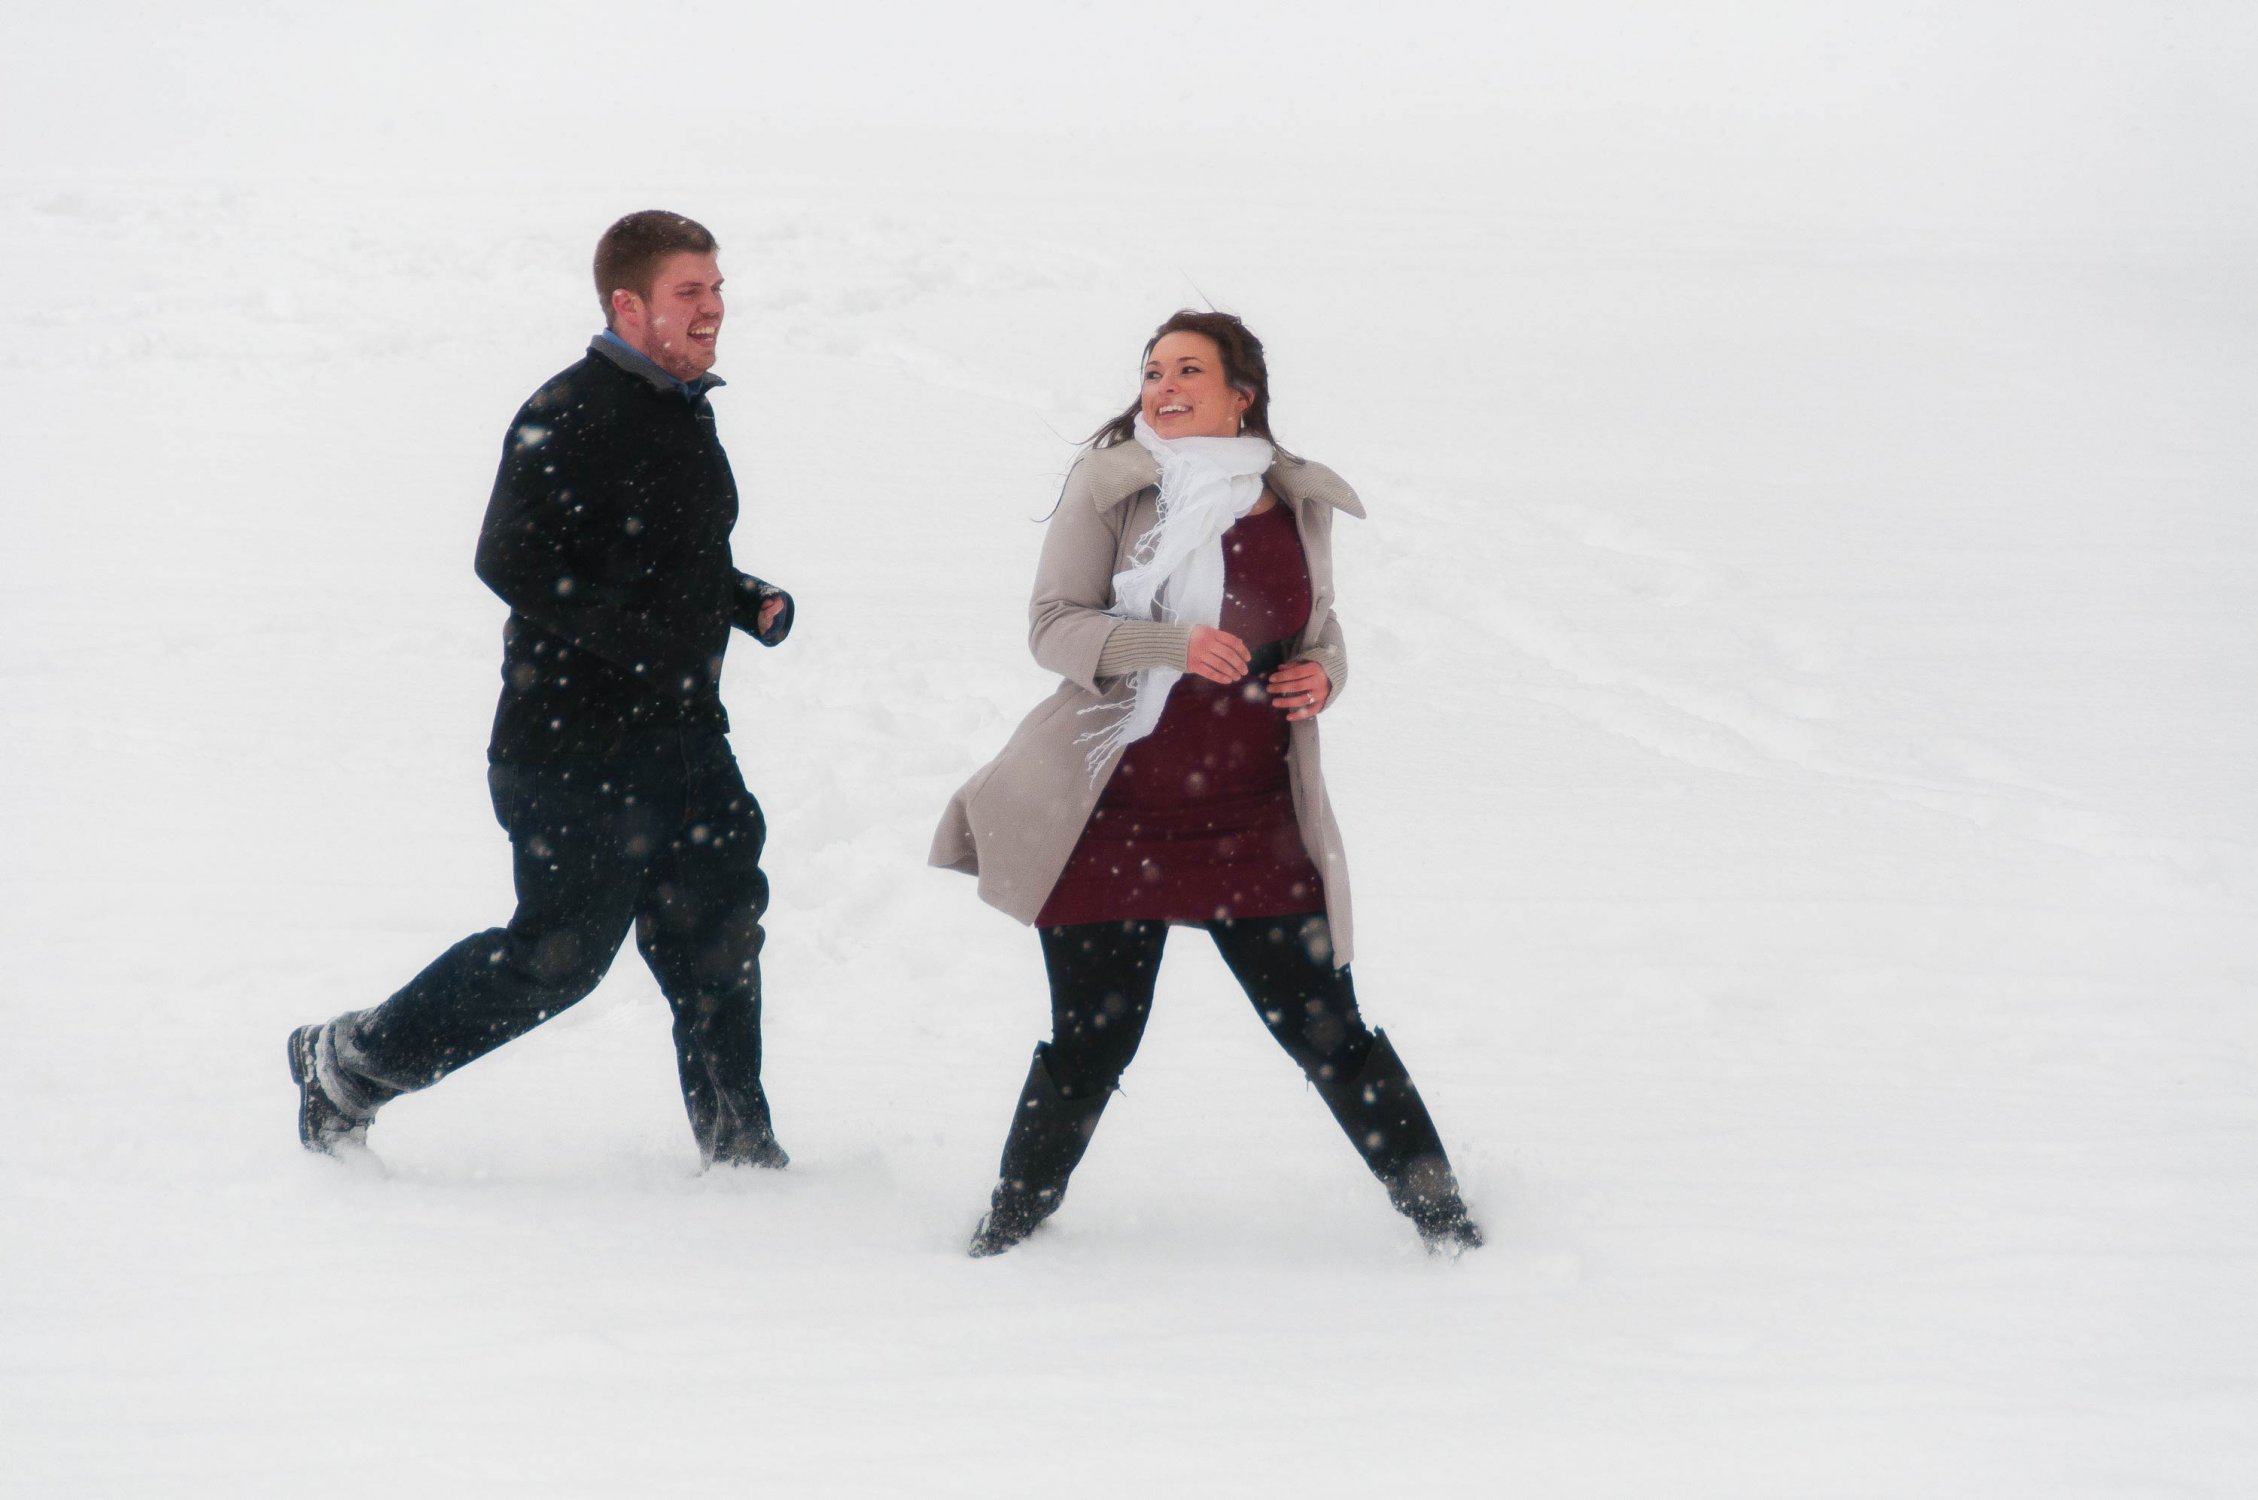 Fun in the snow engagement portrait, lifestyle photo, Pitt, pittsburgh, snow, 